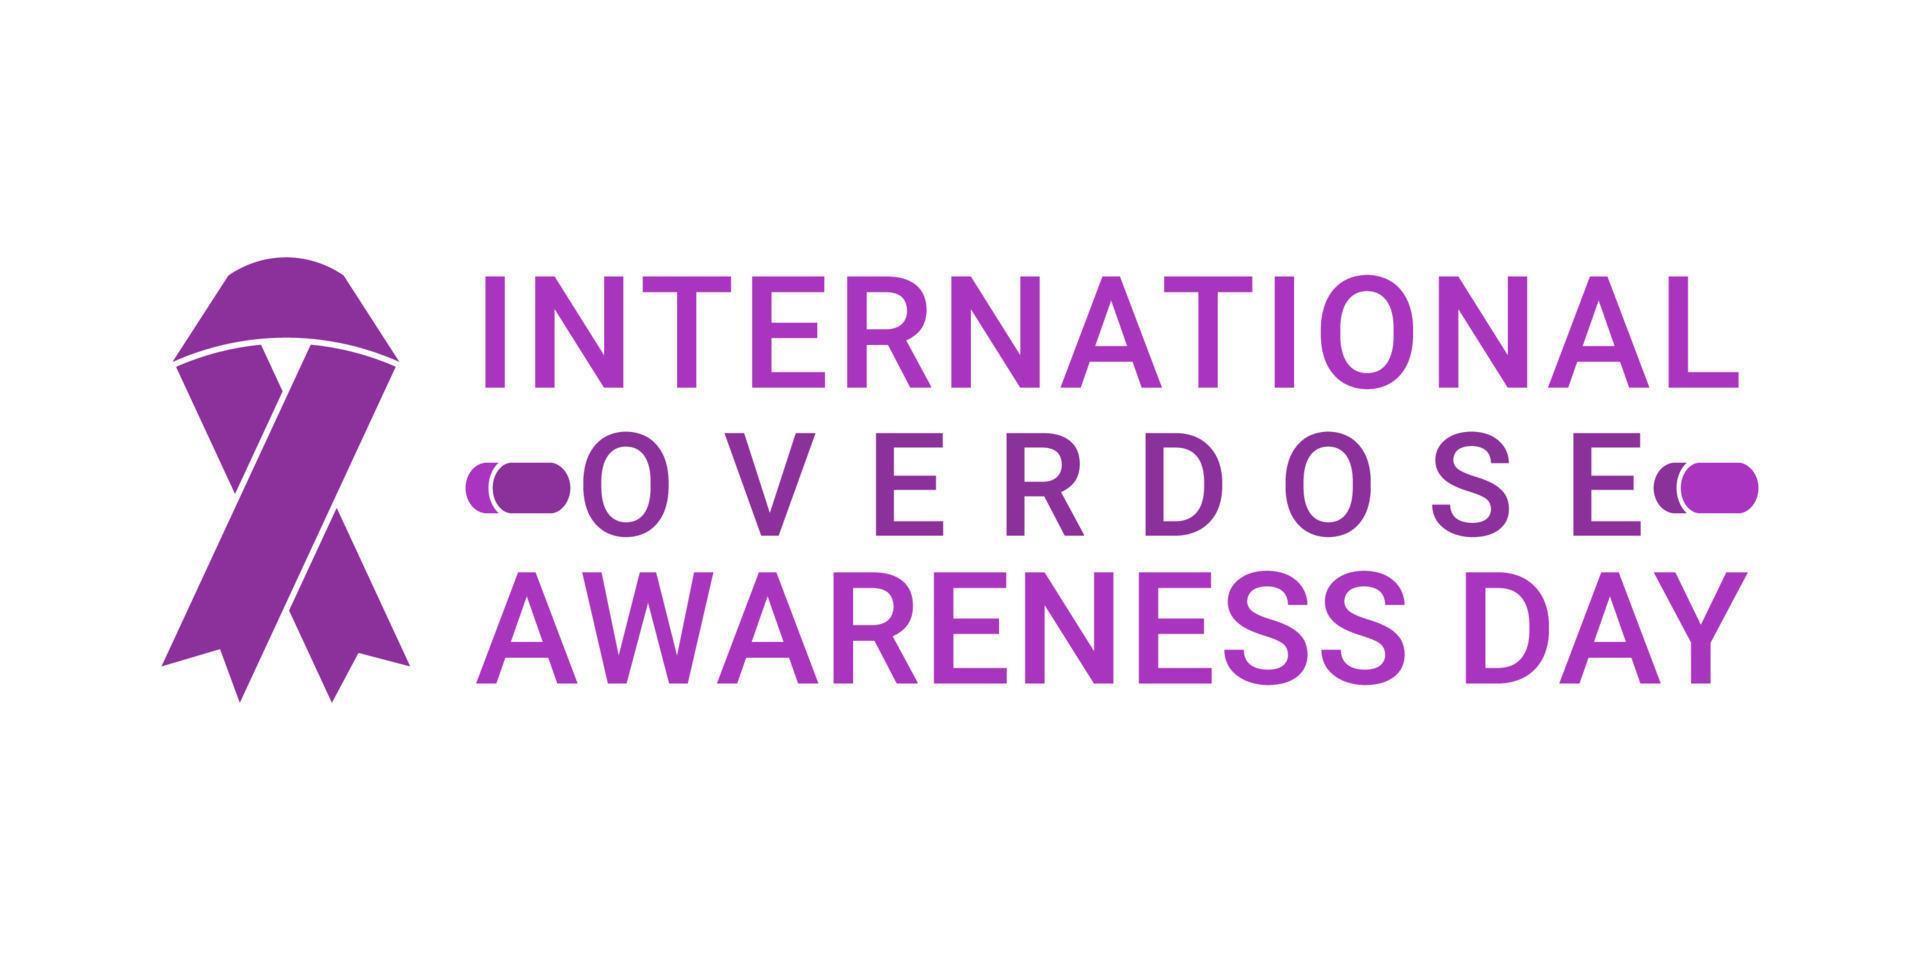 international overdose awareness day August 31st. with a purple badge concept and a pill icon next to the word overdose vector